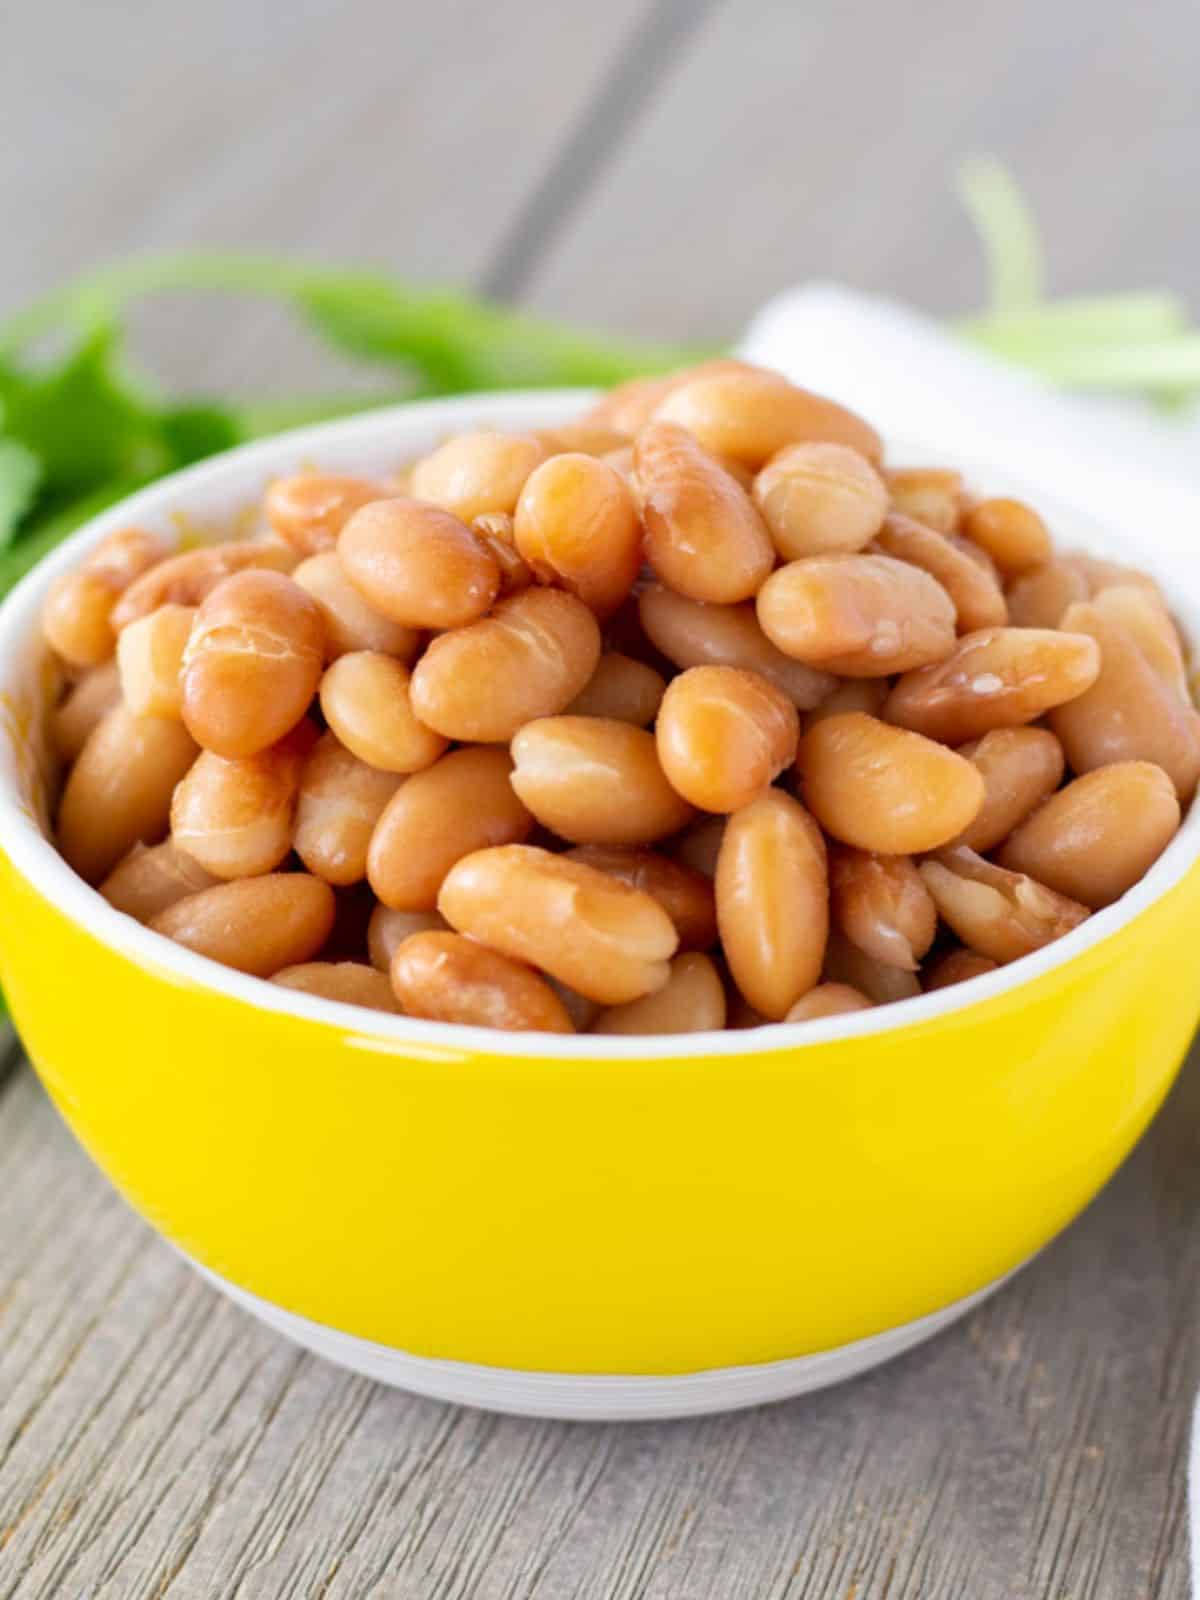 Whole Peruvian beans in a yellow bowl.